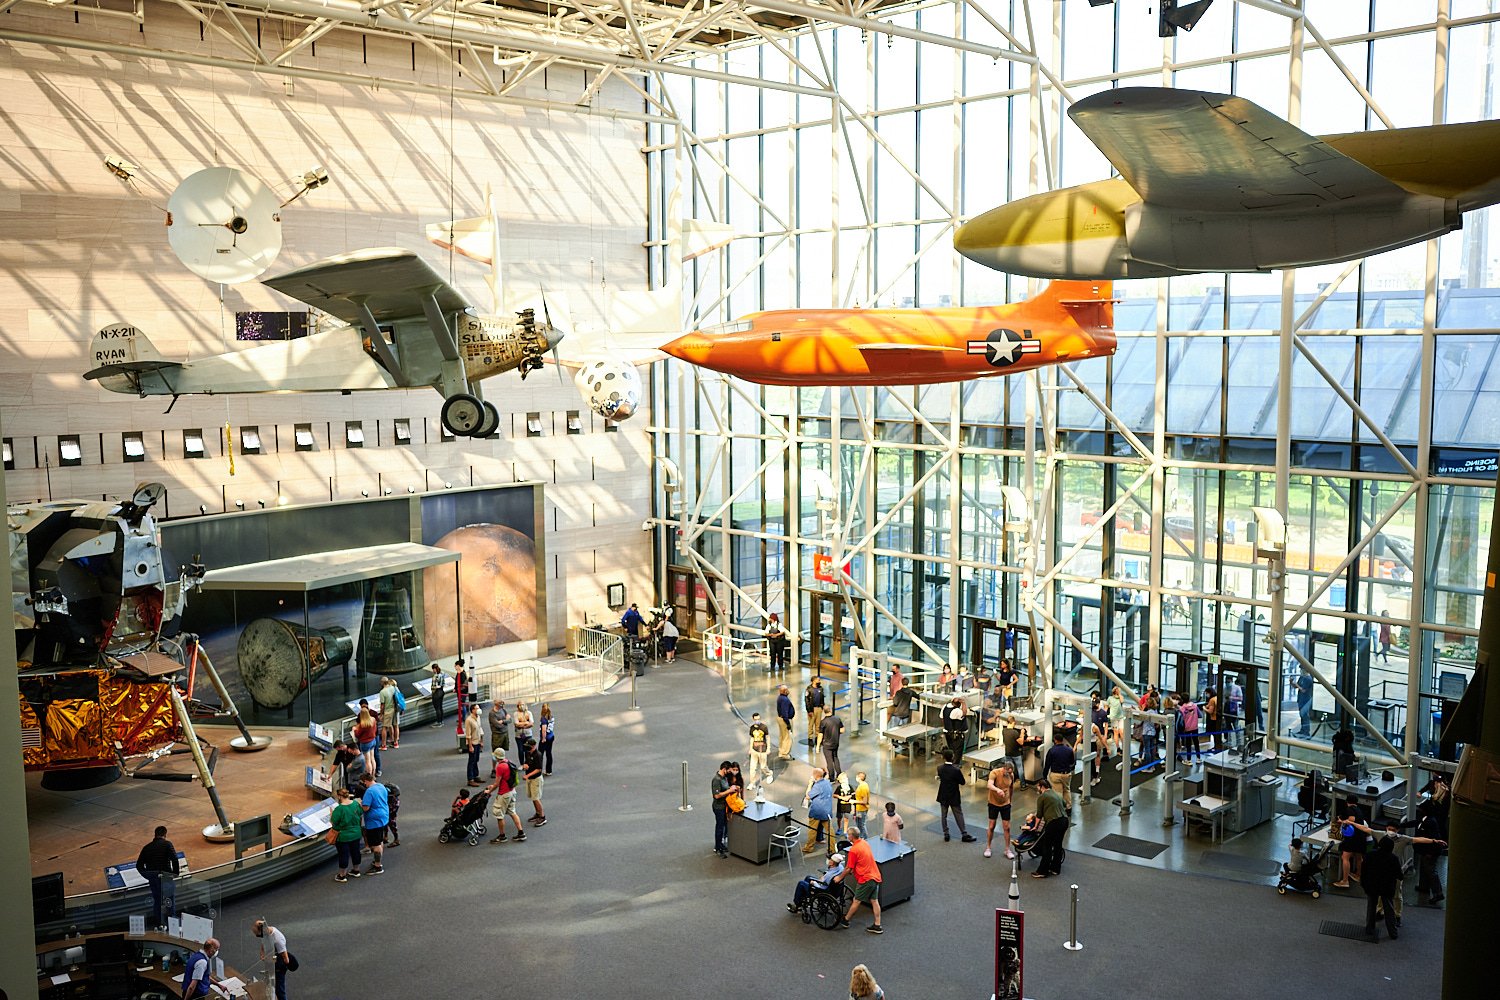  WASHINGTON, DC, USA - OCTOBER 16TH 2021: the awesome interior of The National Air and Space Museum of the Smithsonian Institution. The history of space is presented to attract children of all ages. 